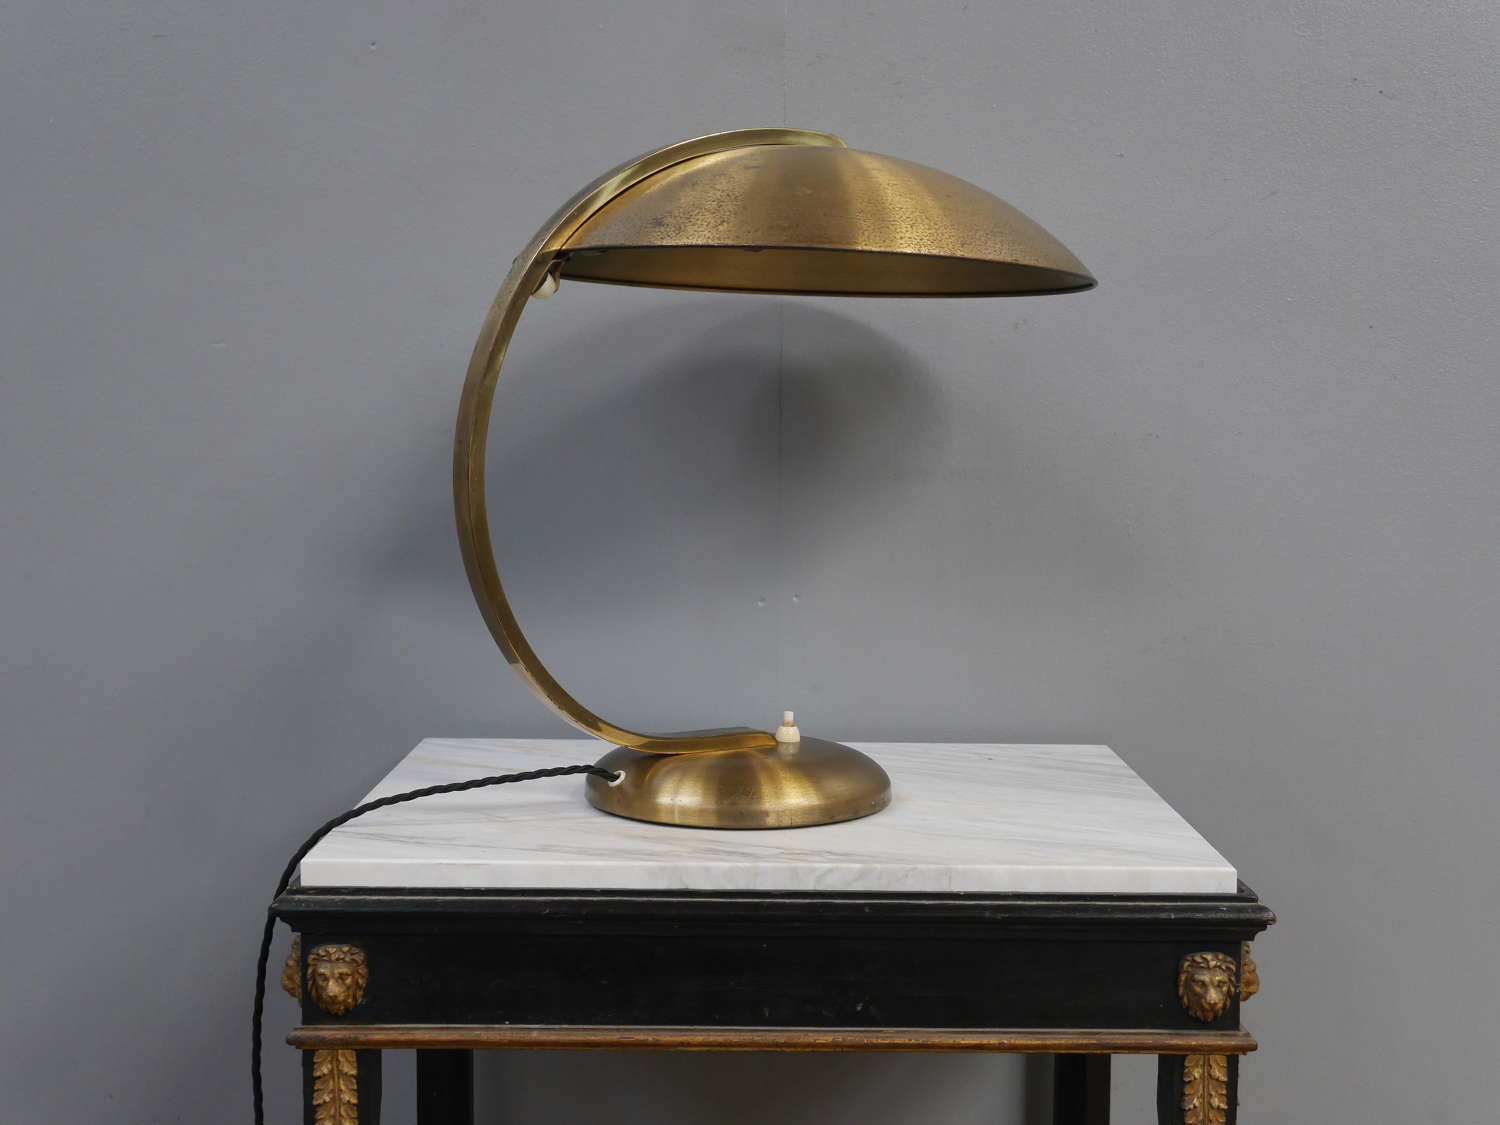 Hillebrand Table Lamp